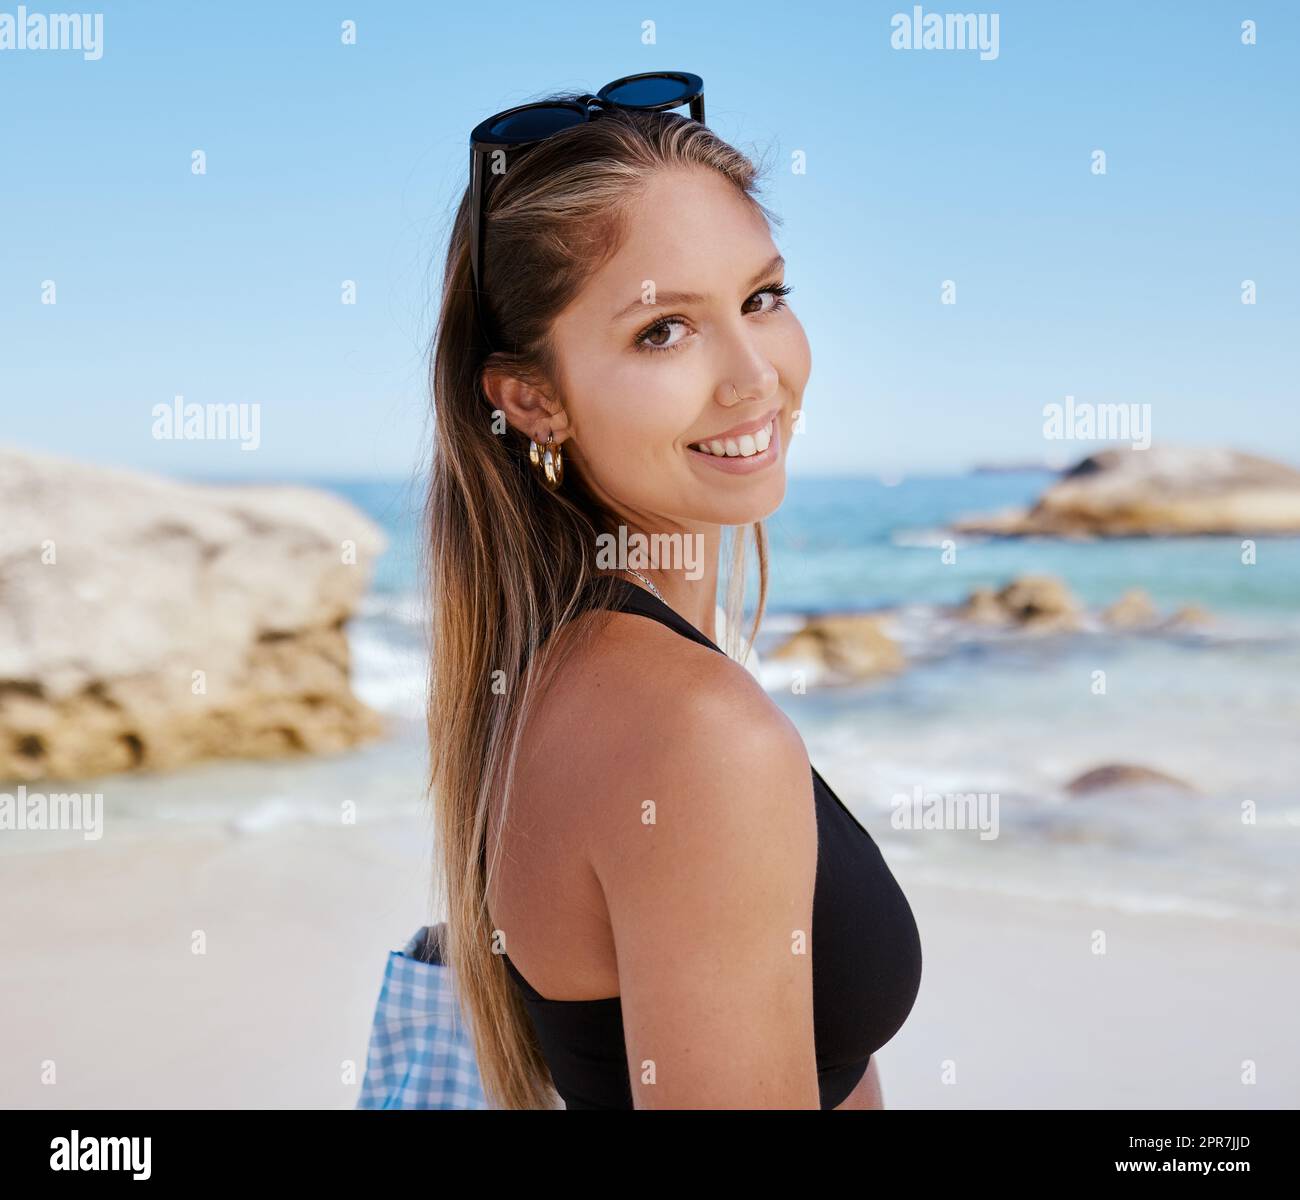 One beautiful young caucasian woman relaxing on the beach. Enjoying a summer vacation or holiday outdoors during summer. Taking time off and getting away from it all. Spending the day alone outside Stock Photo